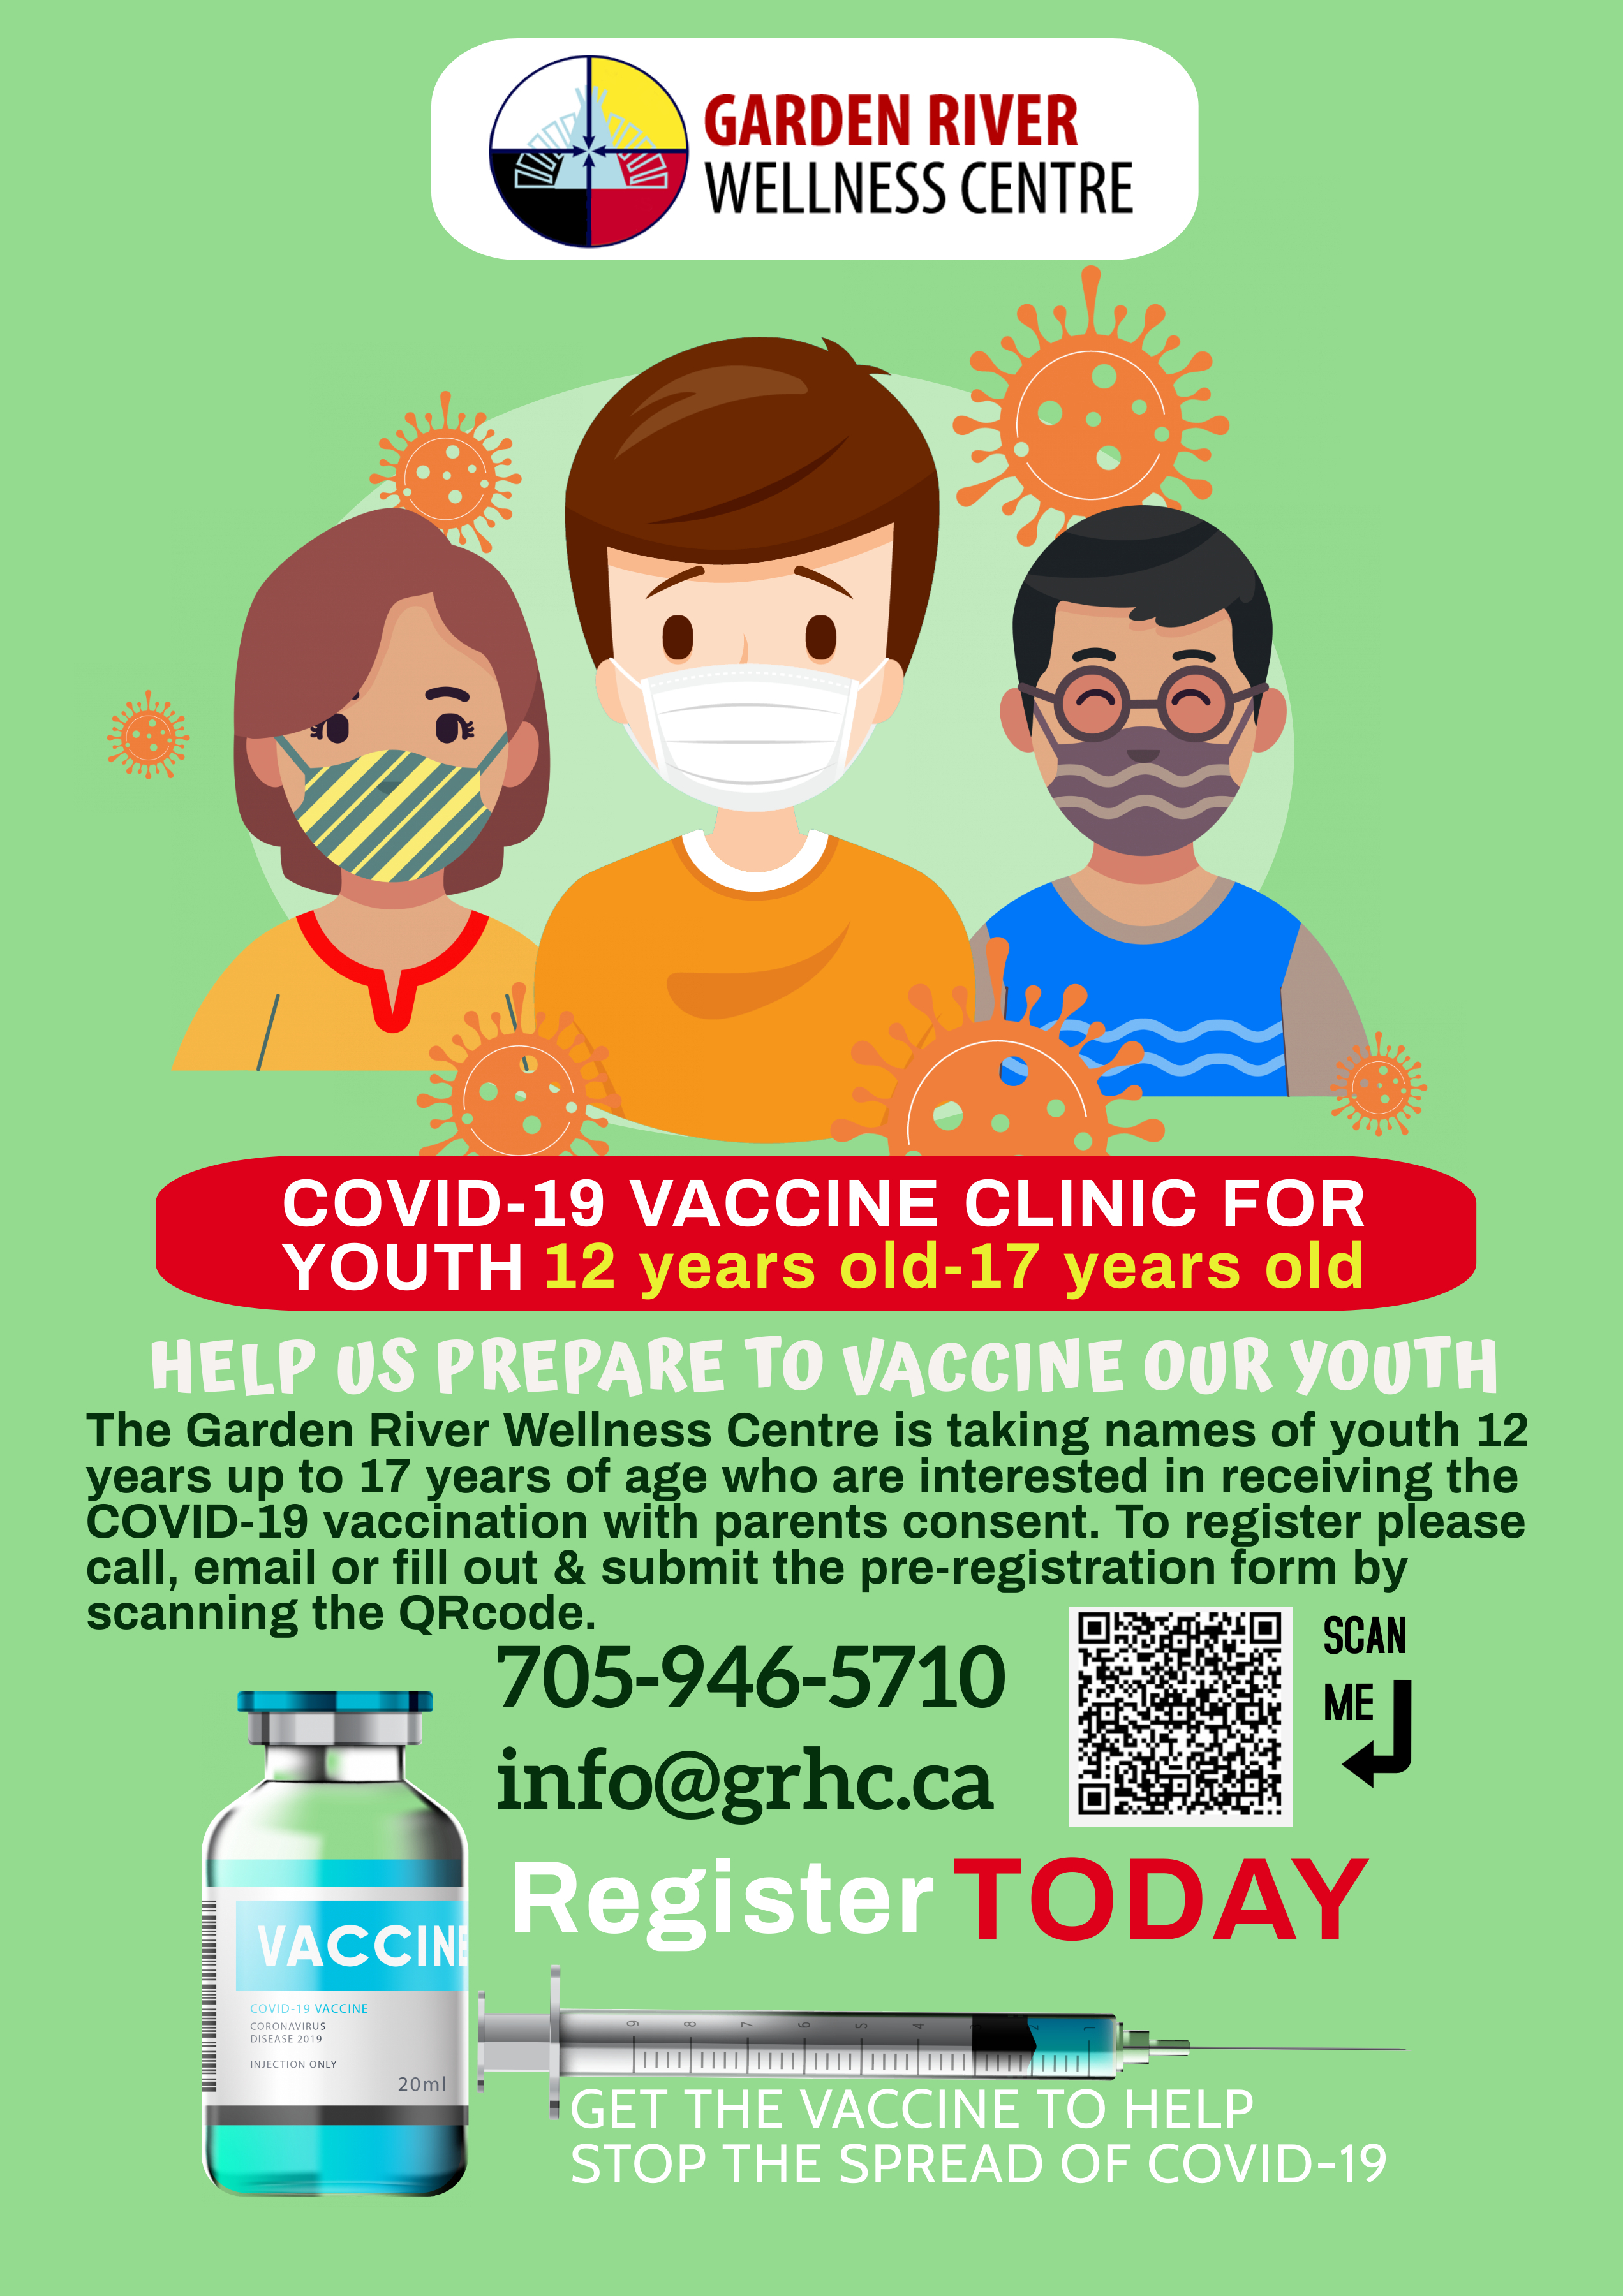 COVID-19 Vaccine Clinc For Youth 12-17